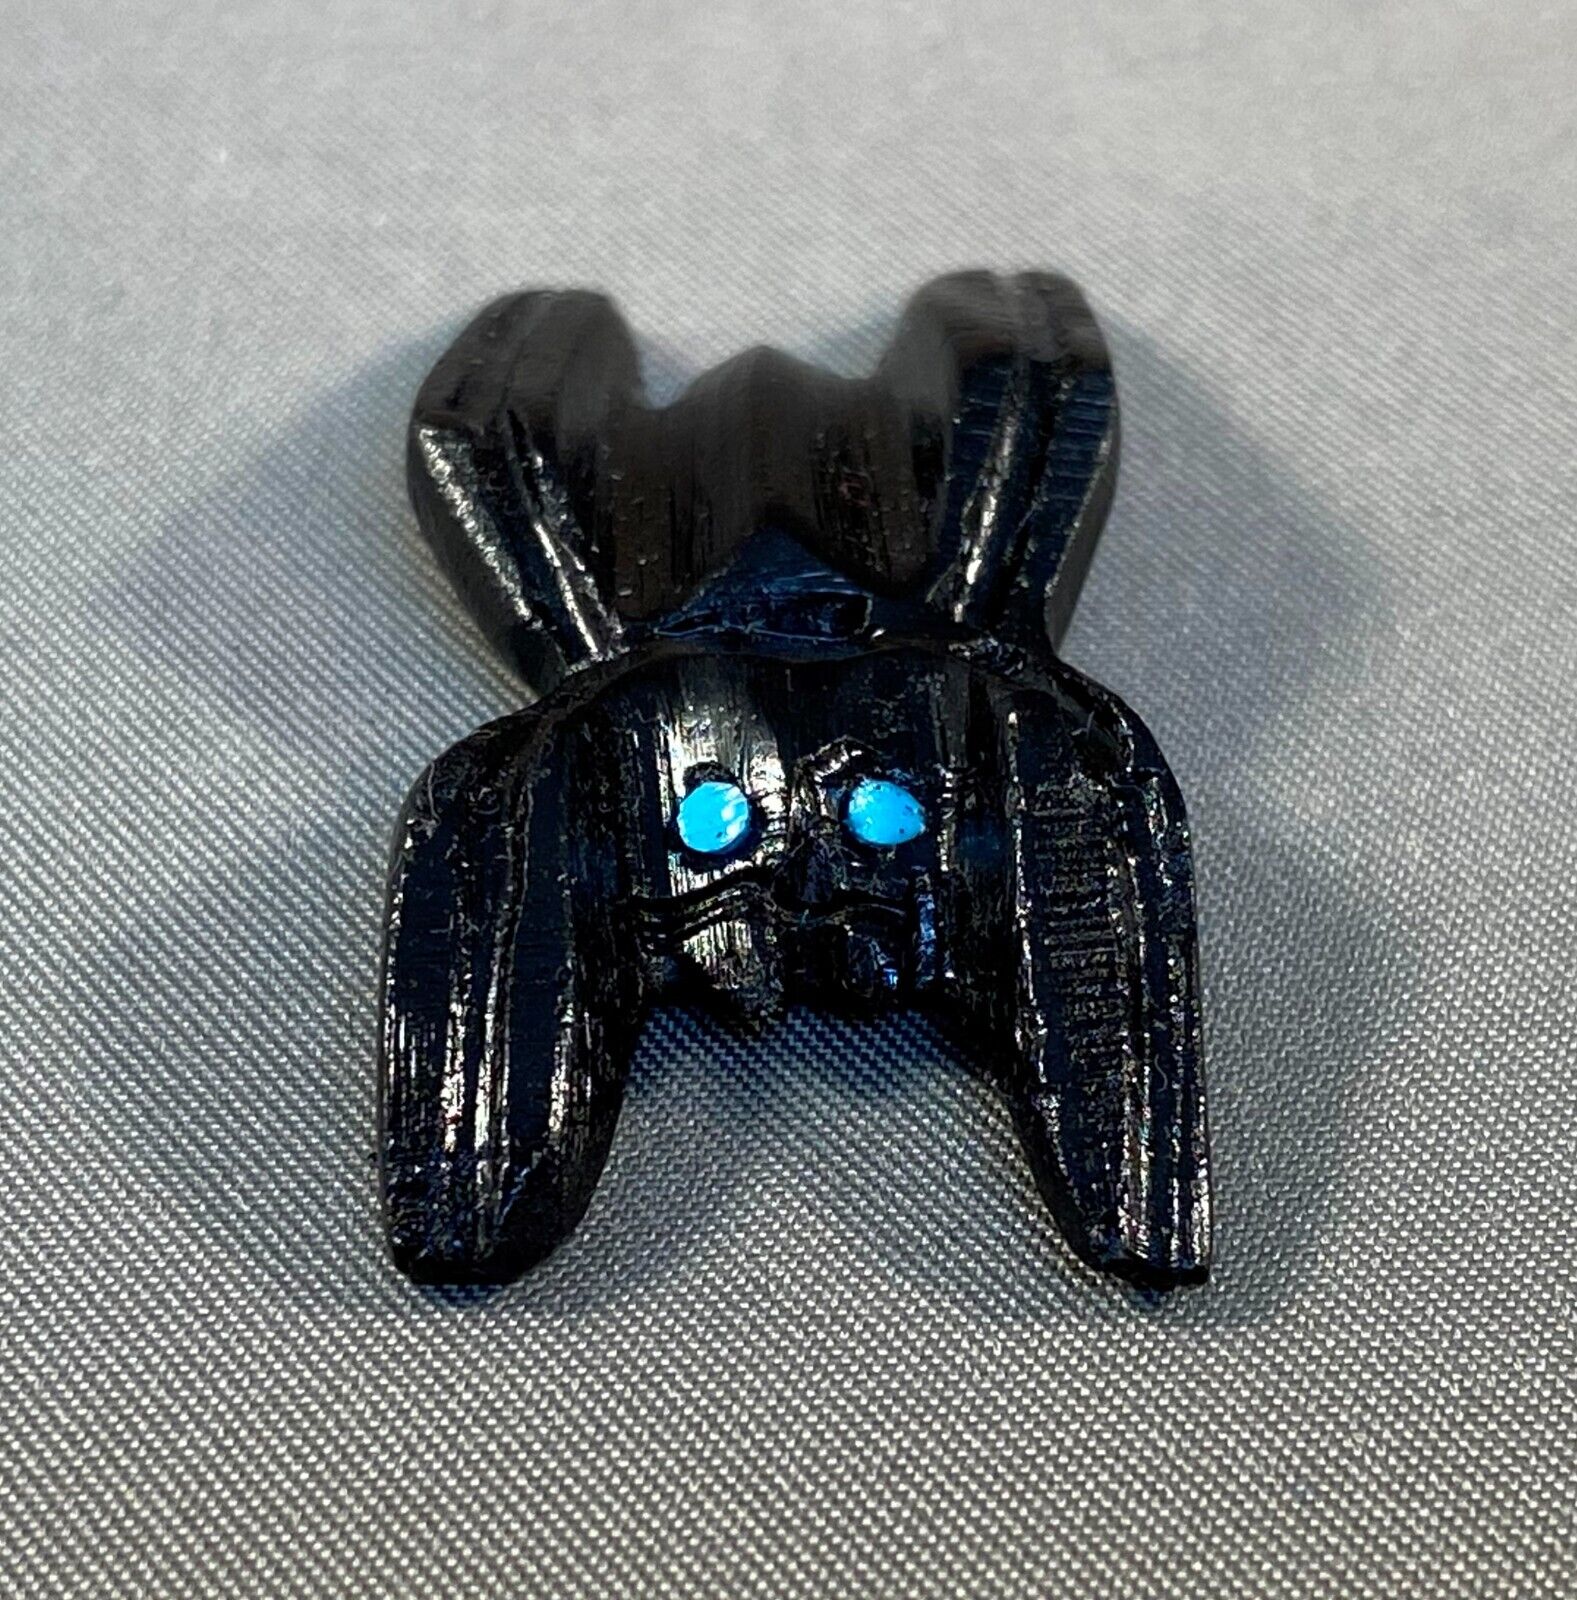 Zuni Carved Black Jet Spider Fetish with Turquoise Eyes by Michael Coble NEW